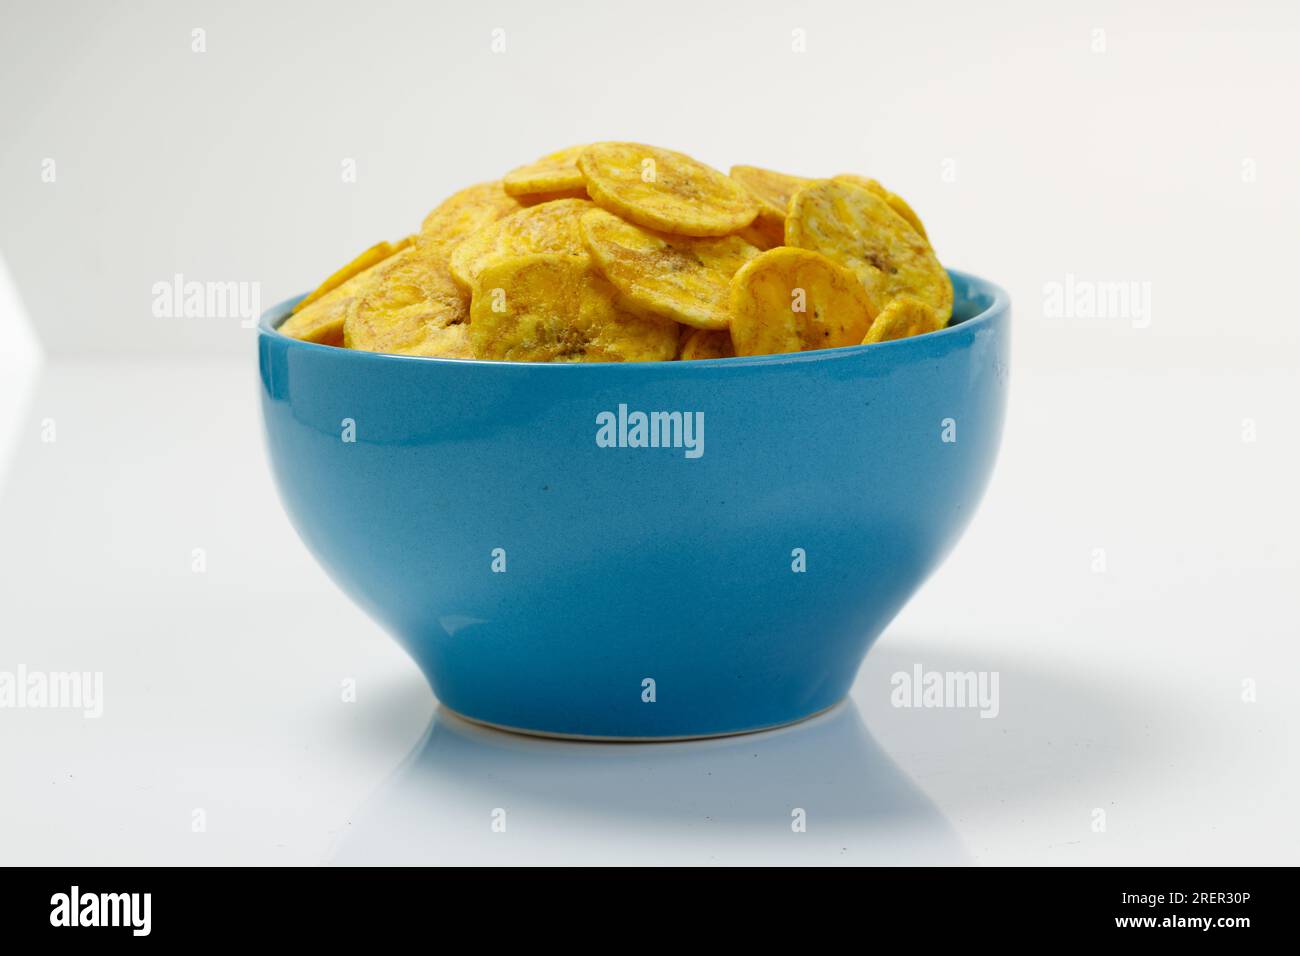 Kerala chips or Banana chips, cult snack item of Kerala,arranged in a pastle colour ceramic bowl,Isolated image with white background Stock Photo